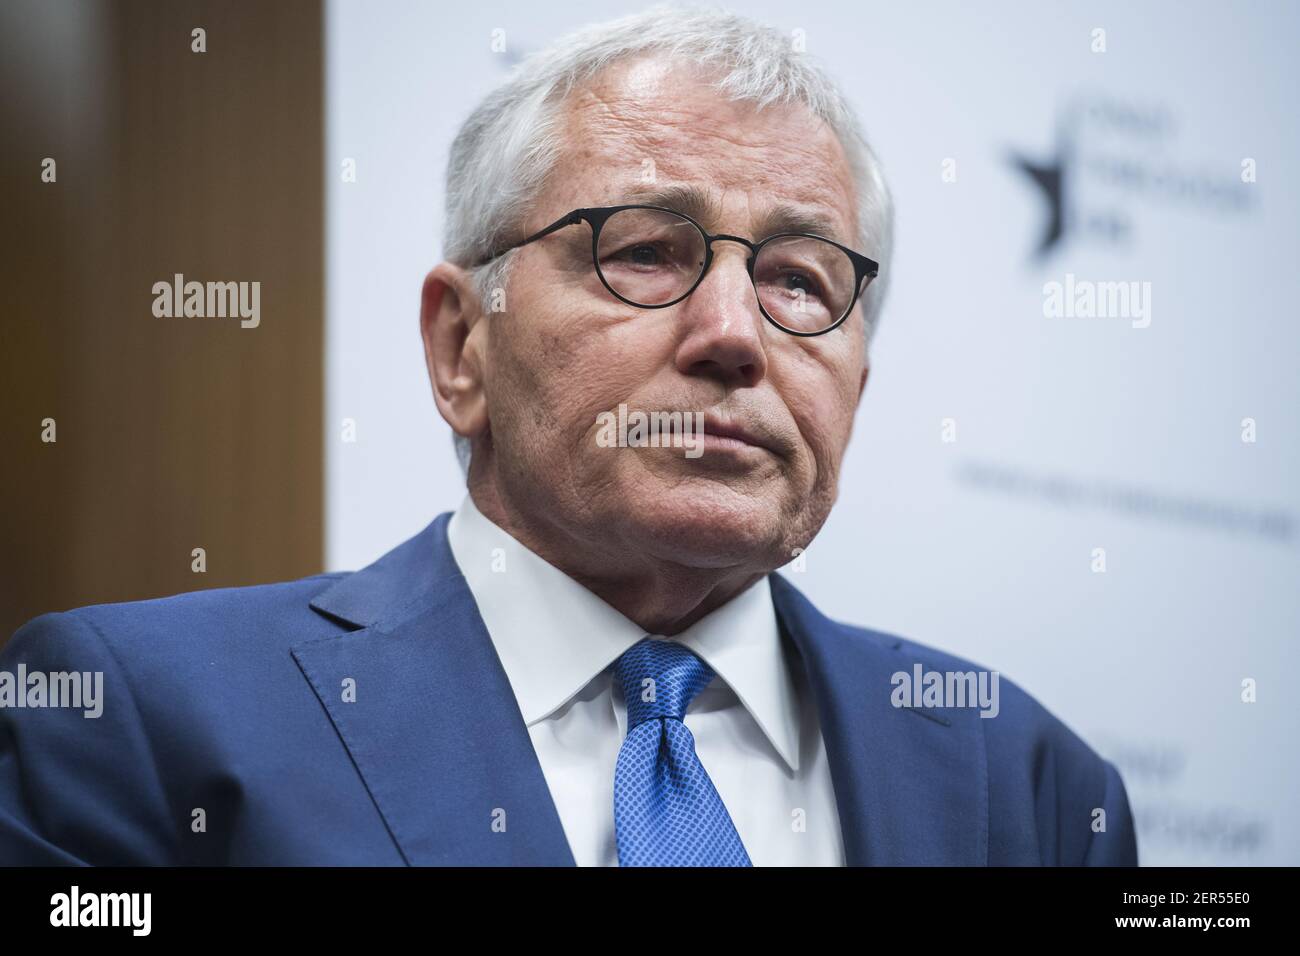 UNITED STATES - APRIL 19: Former senator and Defense Secretary Chuck Hagel, participates in a briefing in Dirksen Building titled "U.S. National Security and the Travel Ban," on April 19, 2018. The event was hosted by Human Rights First and Only Through US. (Photo By Tom Williams/CQ Roll Call) Stock Photo